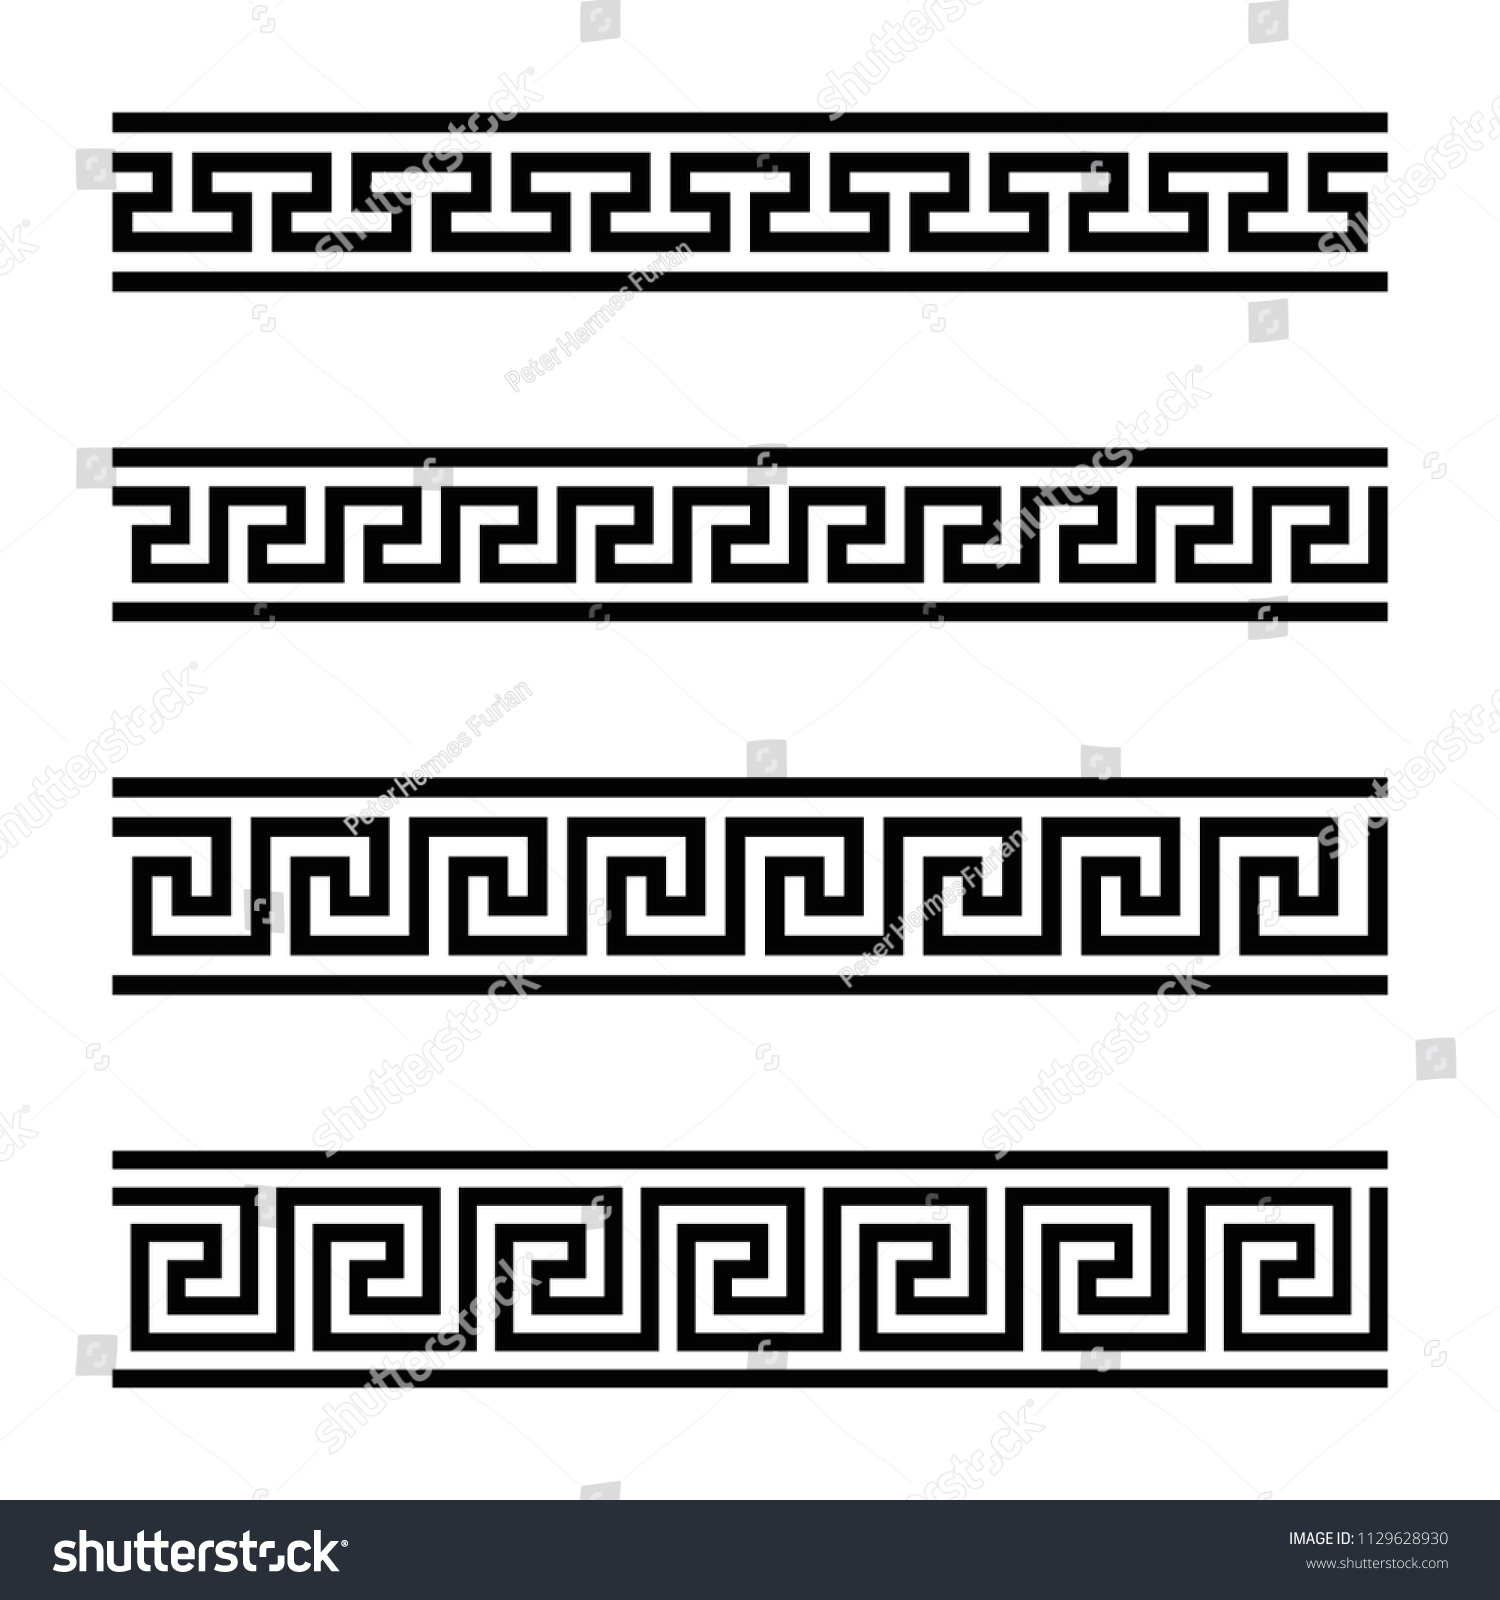 Four seamless meander designs. Meandros, a decorative border, constructed from continuous lines, shaped into a repeated motif. Greek fret or Greek key. Black and white illustration over white. Vector. #1129628930